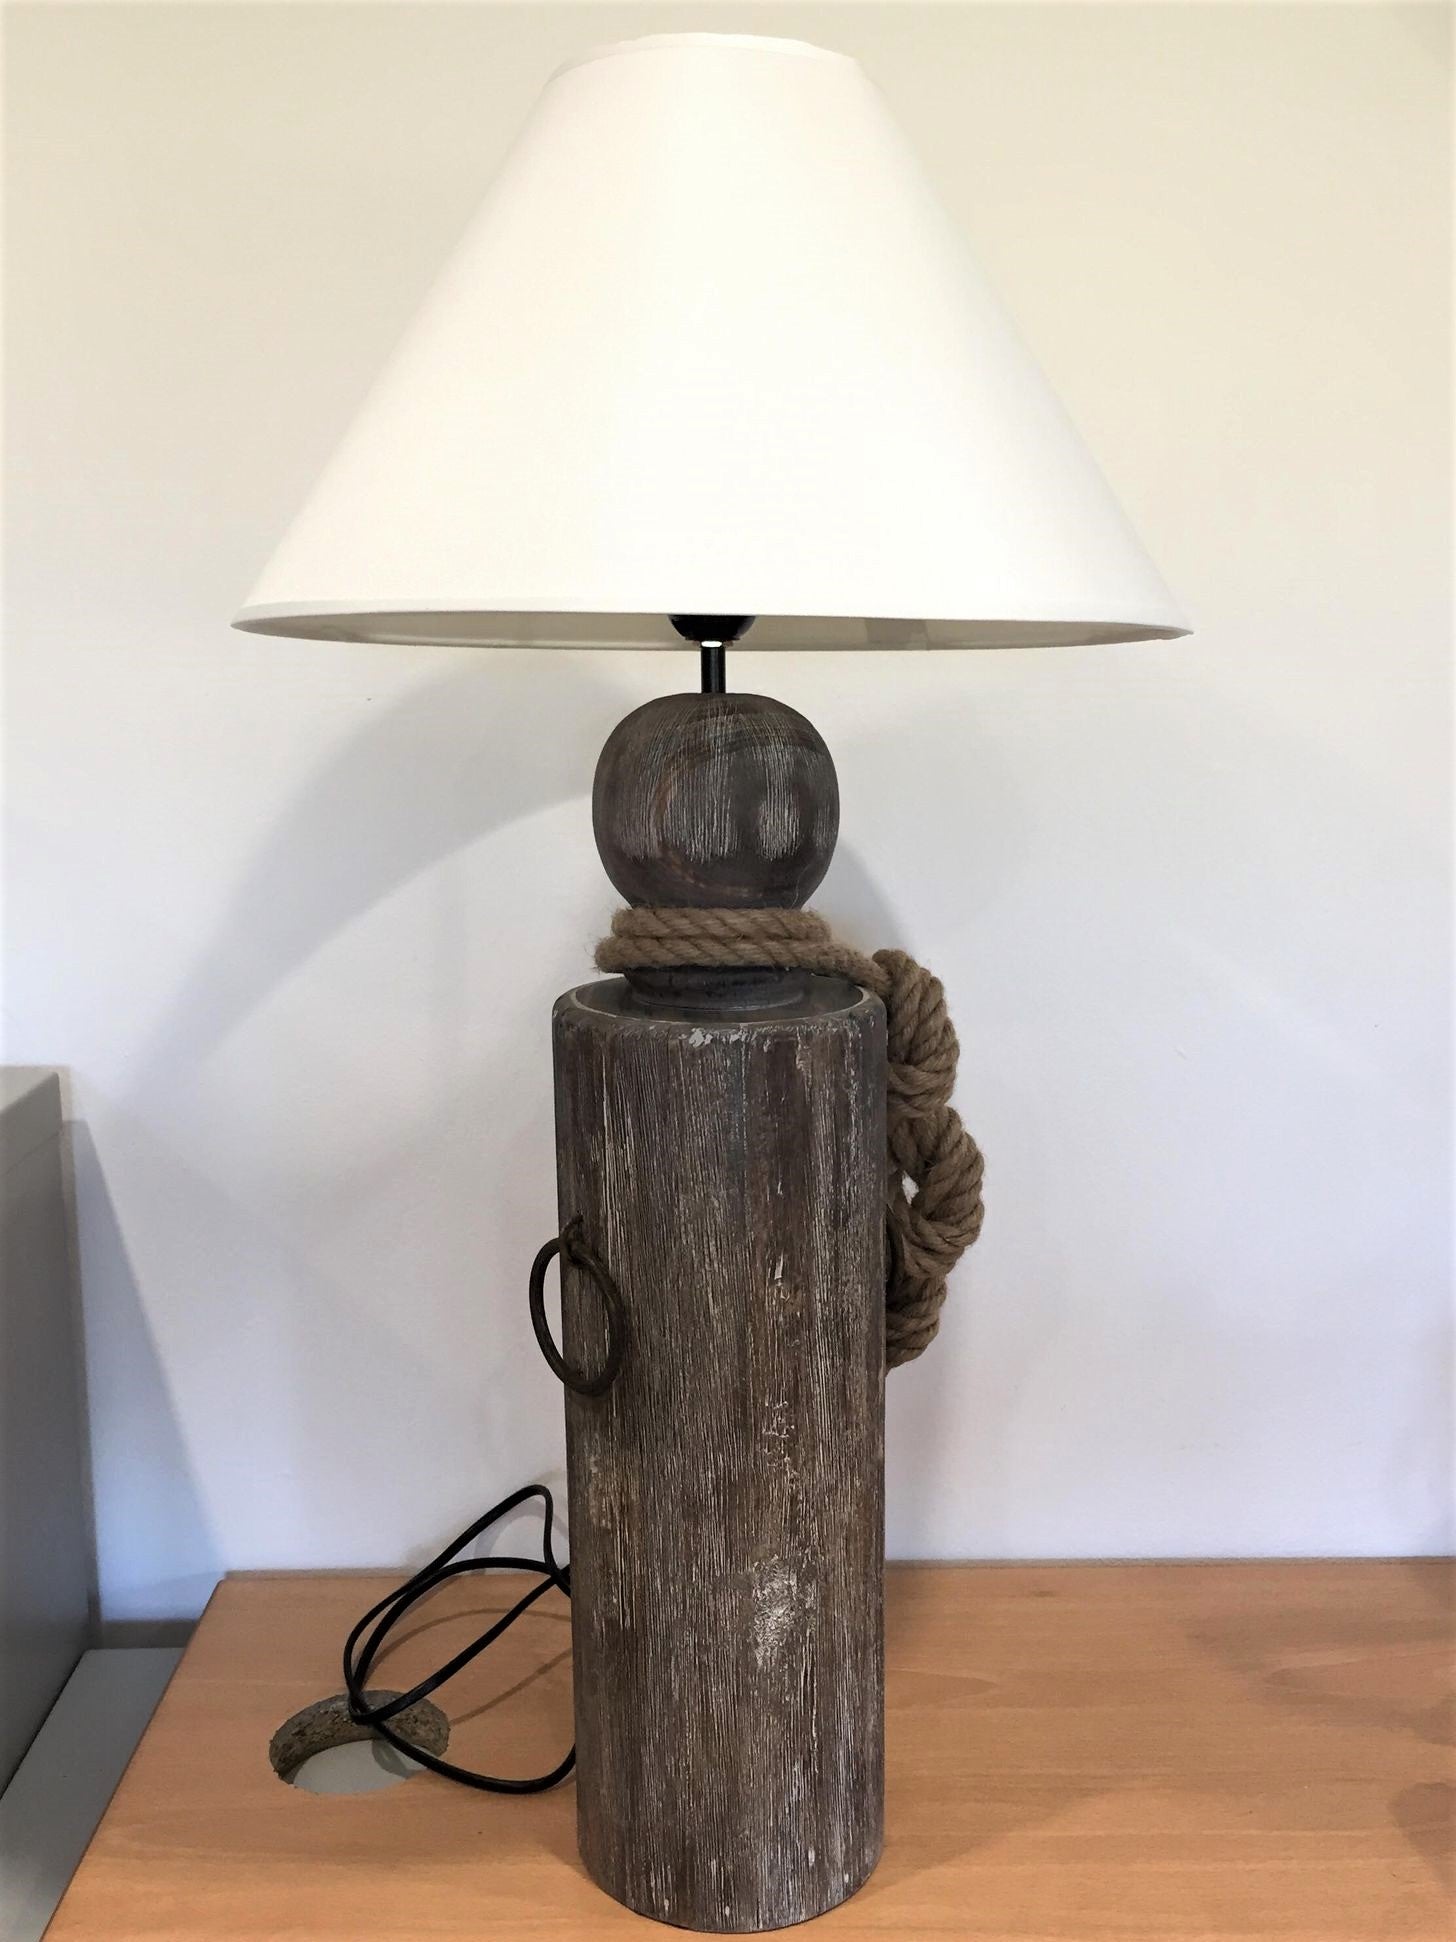 Post With Fisherman's Rope Lamp